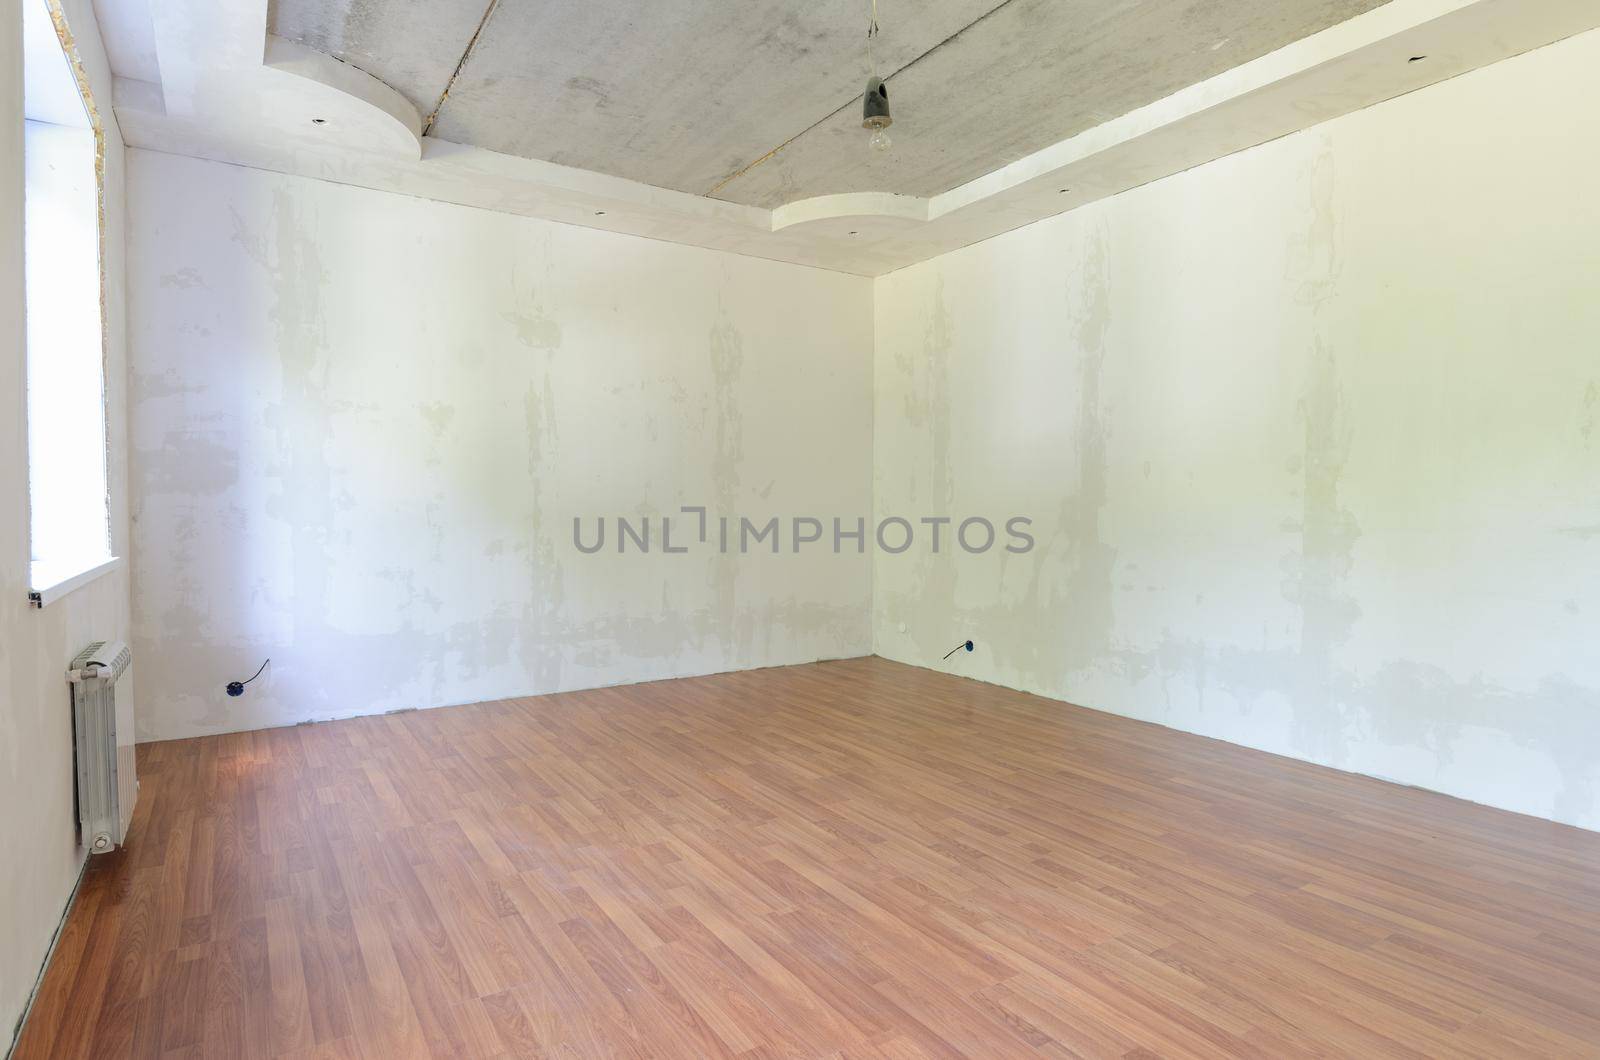 Interior of an empty room during renovation with plastered walls and laminate flooring a